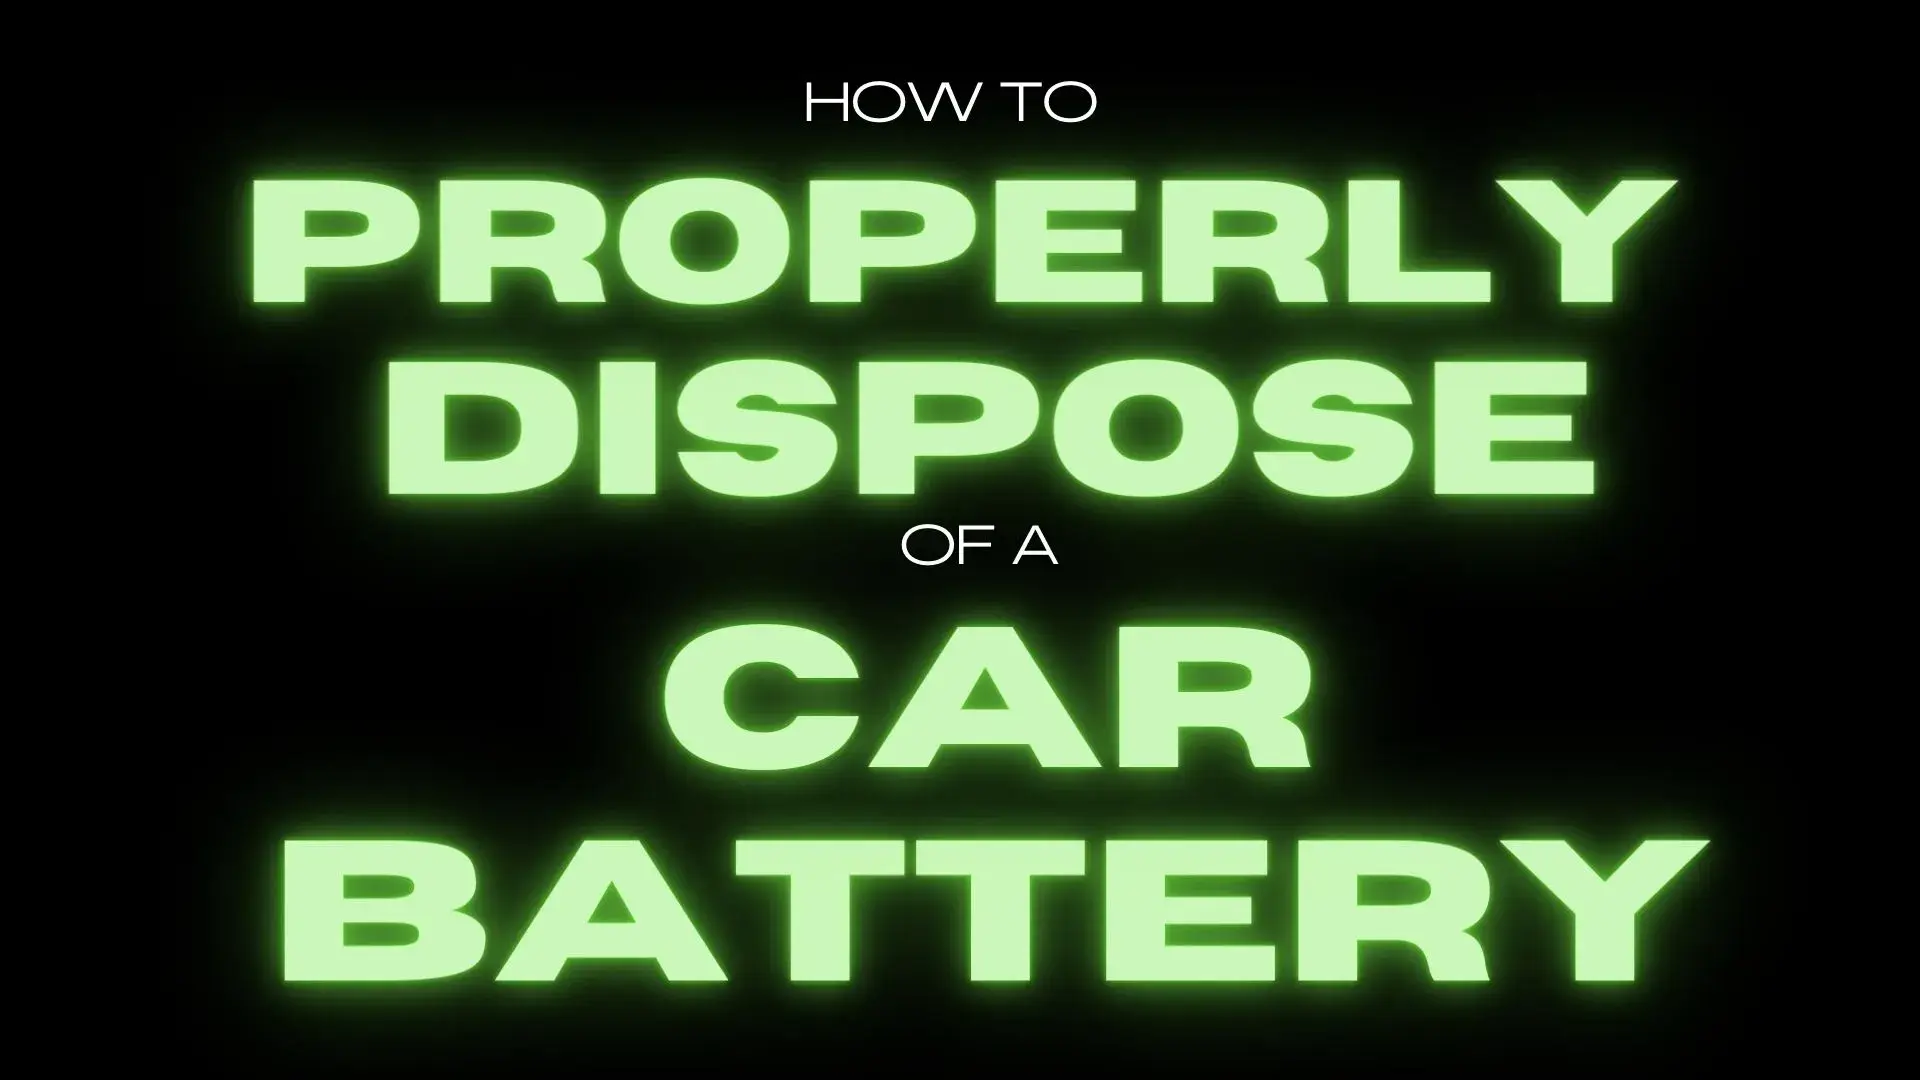 How to Properly Dispose of a Car Battery